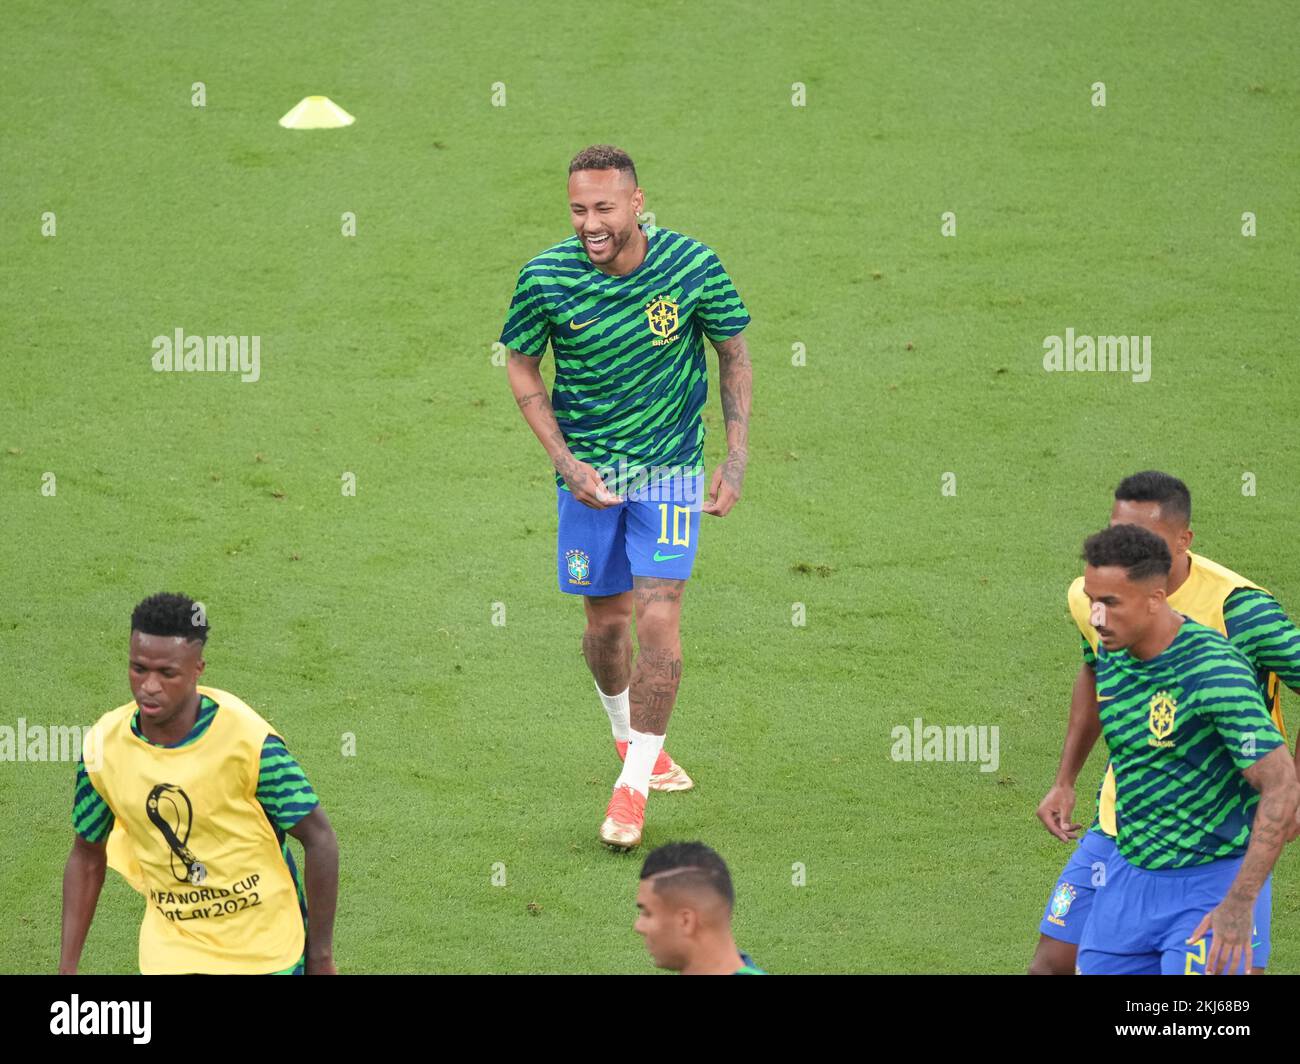 Lusail, Qatar. 24th Nov, 2022. Neymar (Top) of Brazil warms up before the Group G match between Brazil and Serbia at the 2022 FIFA World Cup at Lusail Stadium in Lusail, Qatar, Nov. 24, 2022. Credit: Ding Xu/Xinhua/Alamy Live News Stock Photo